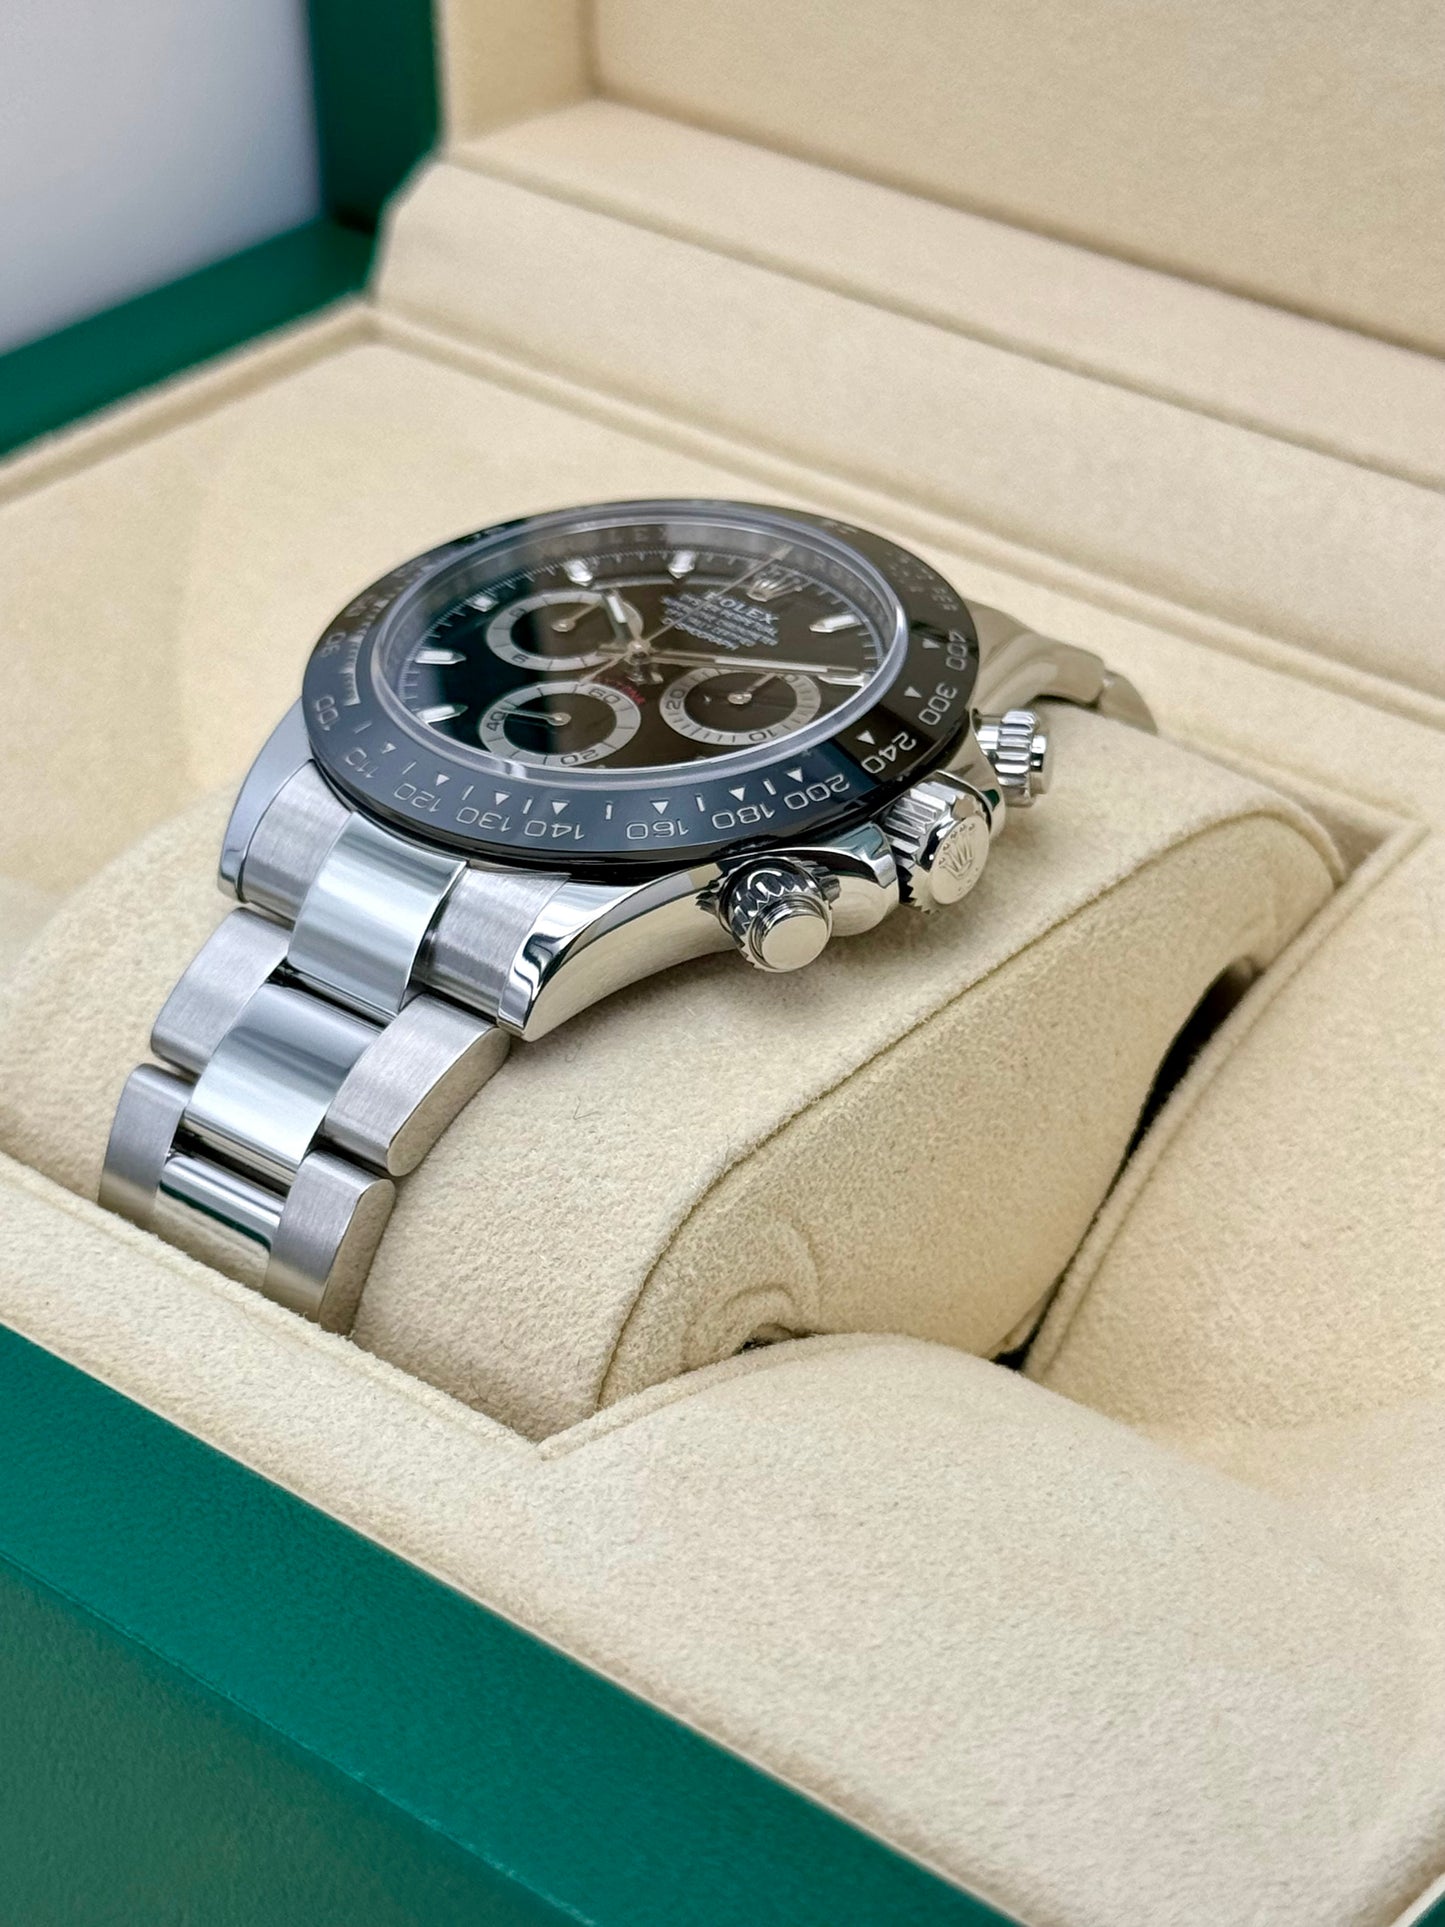 2019 Rolex Daytona 40mm 116500LN Stainless Steel Black Dial - MyWatchLLC